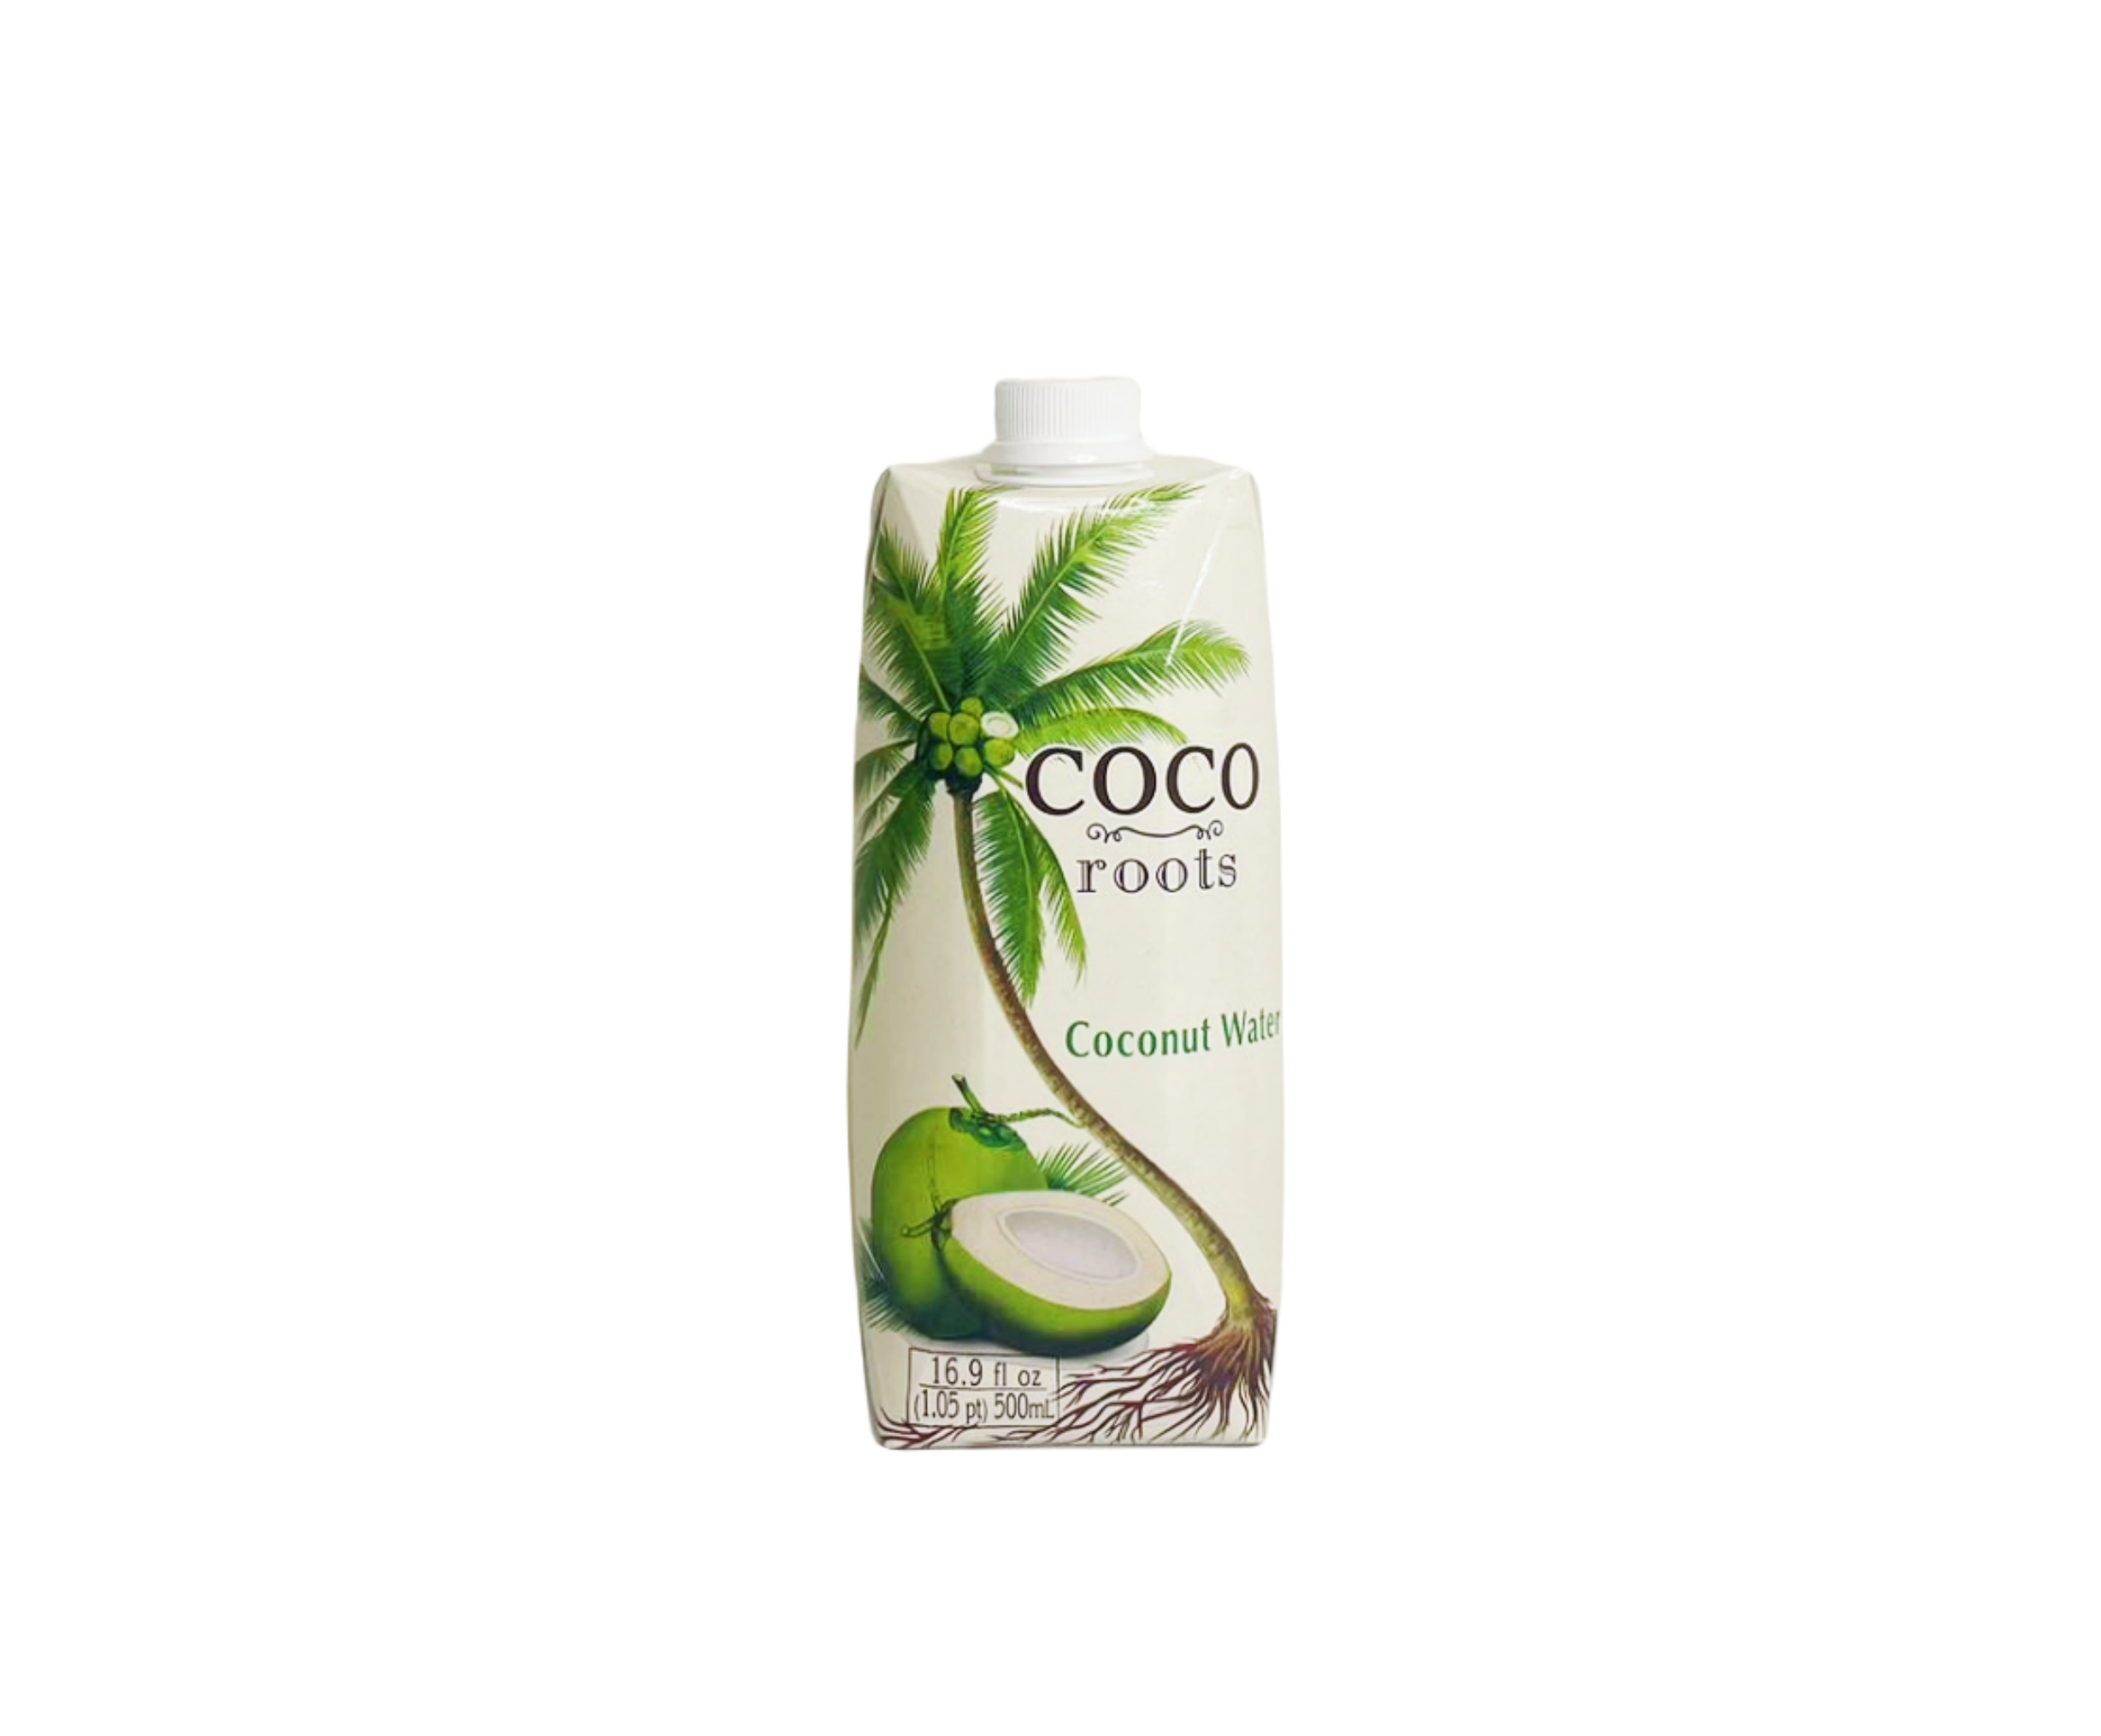 Coconut Water Pure UHT 500ml Coco Roots Thailand 